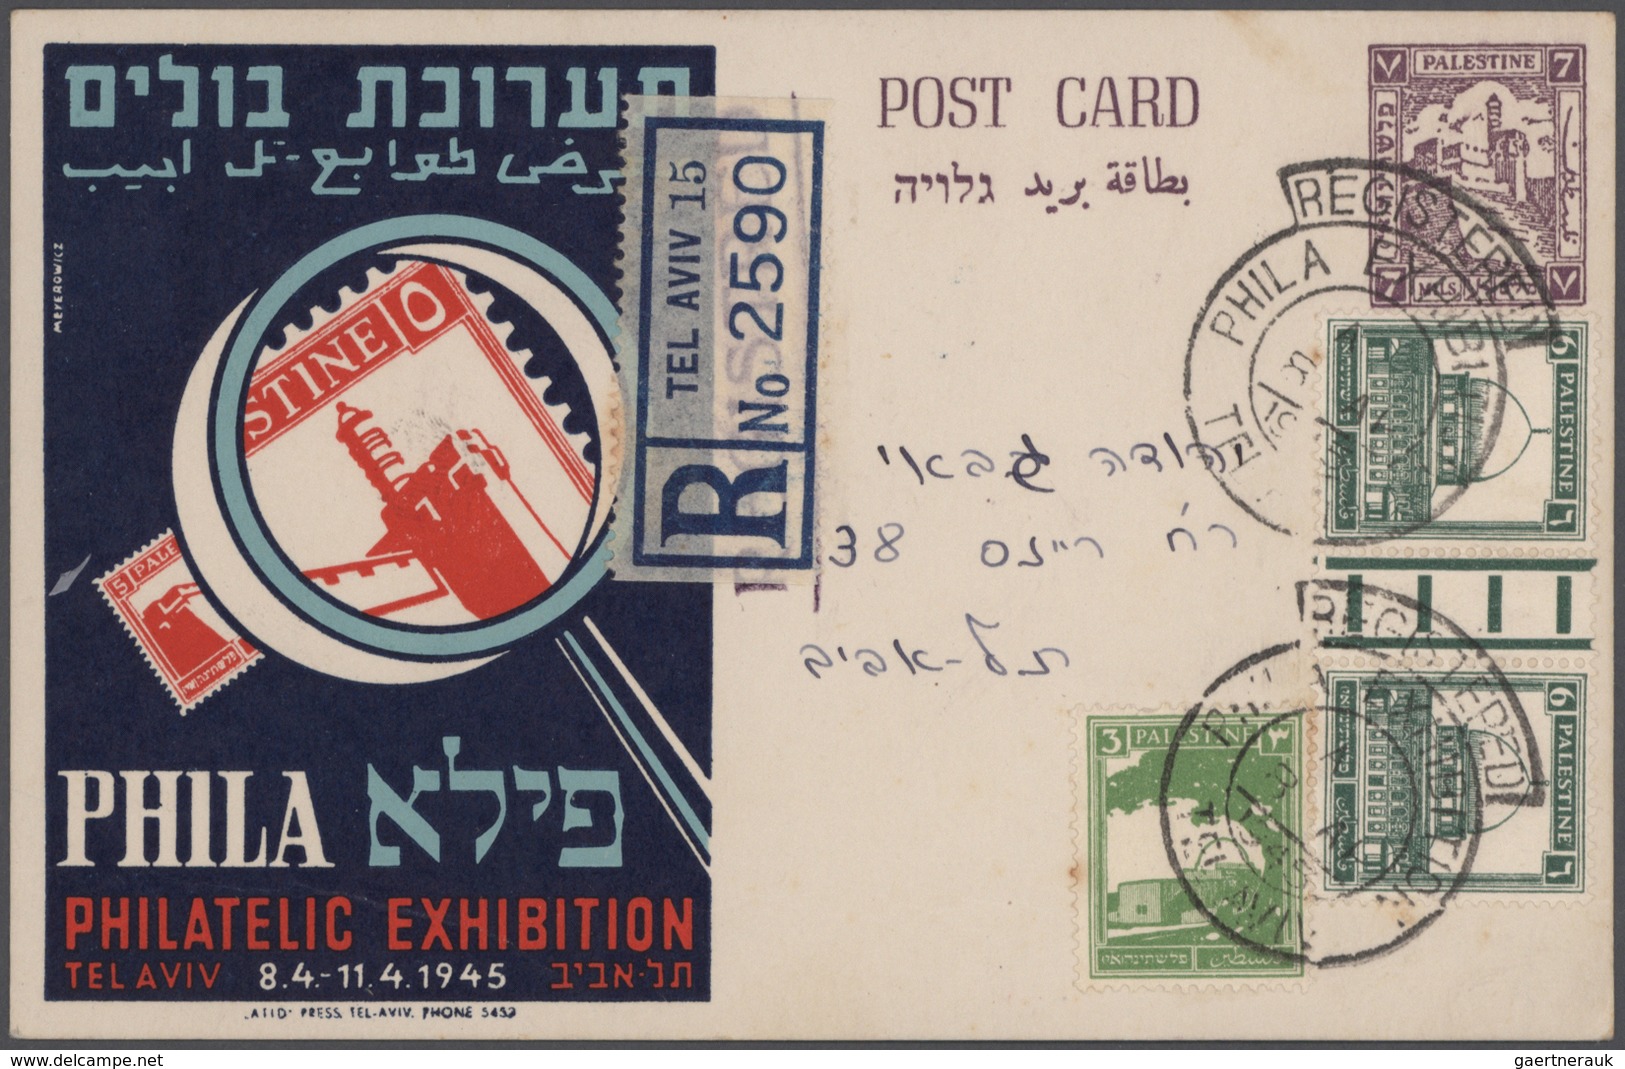 Israel: 1947/2017 (ca.), with three big lots we offer the legacy of a great Israel collector. This l